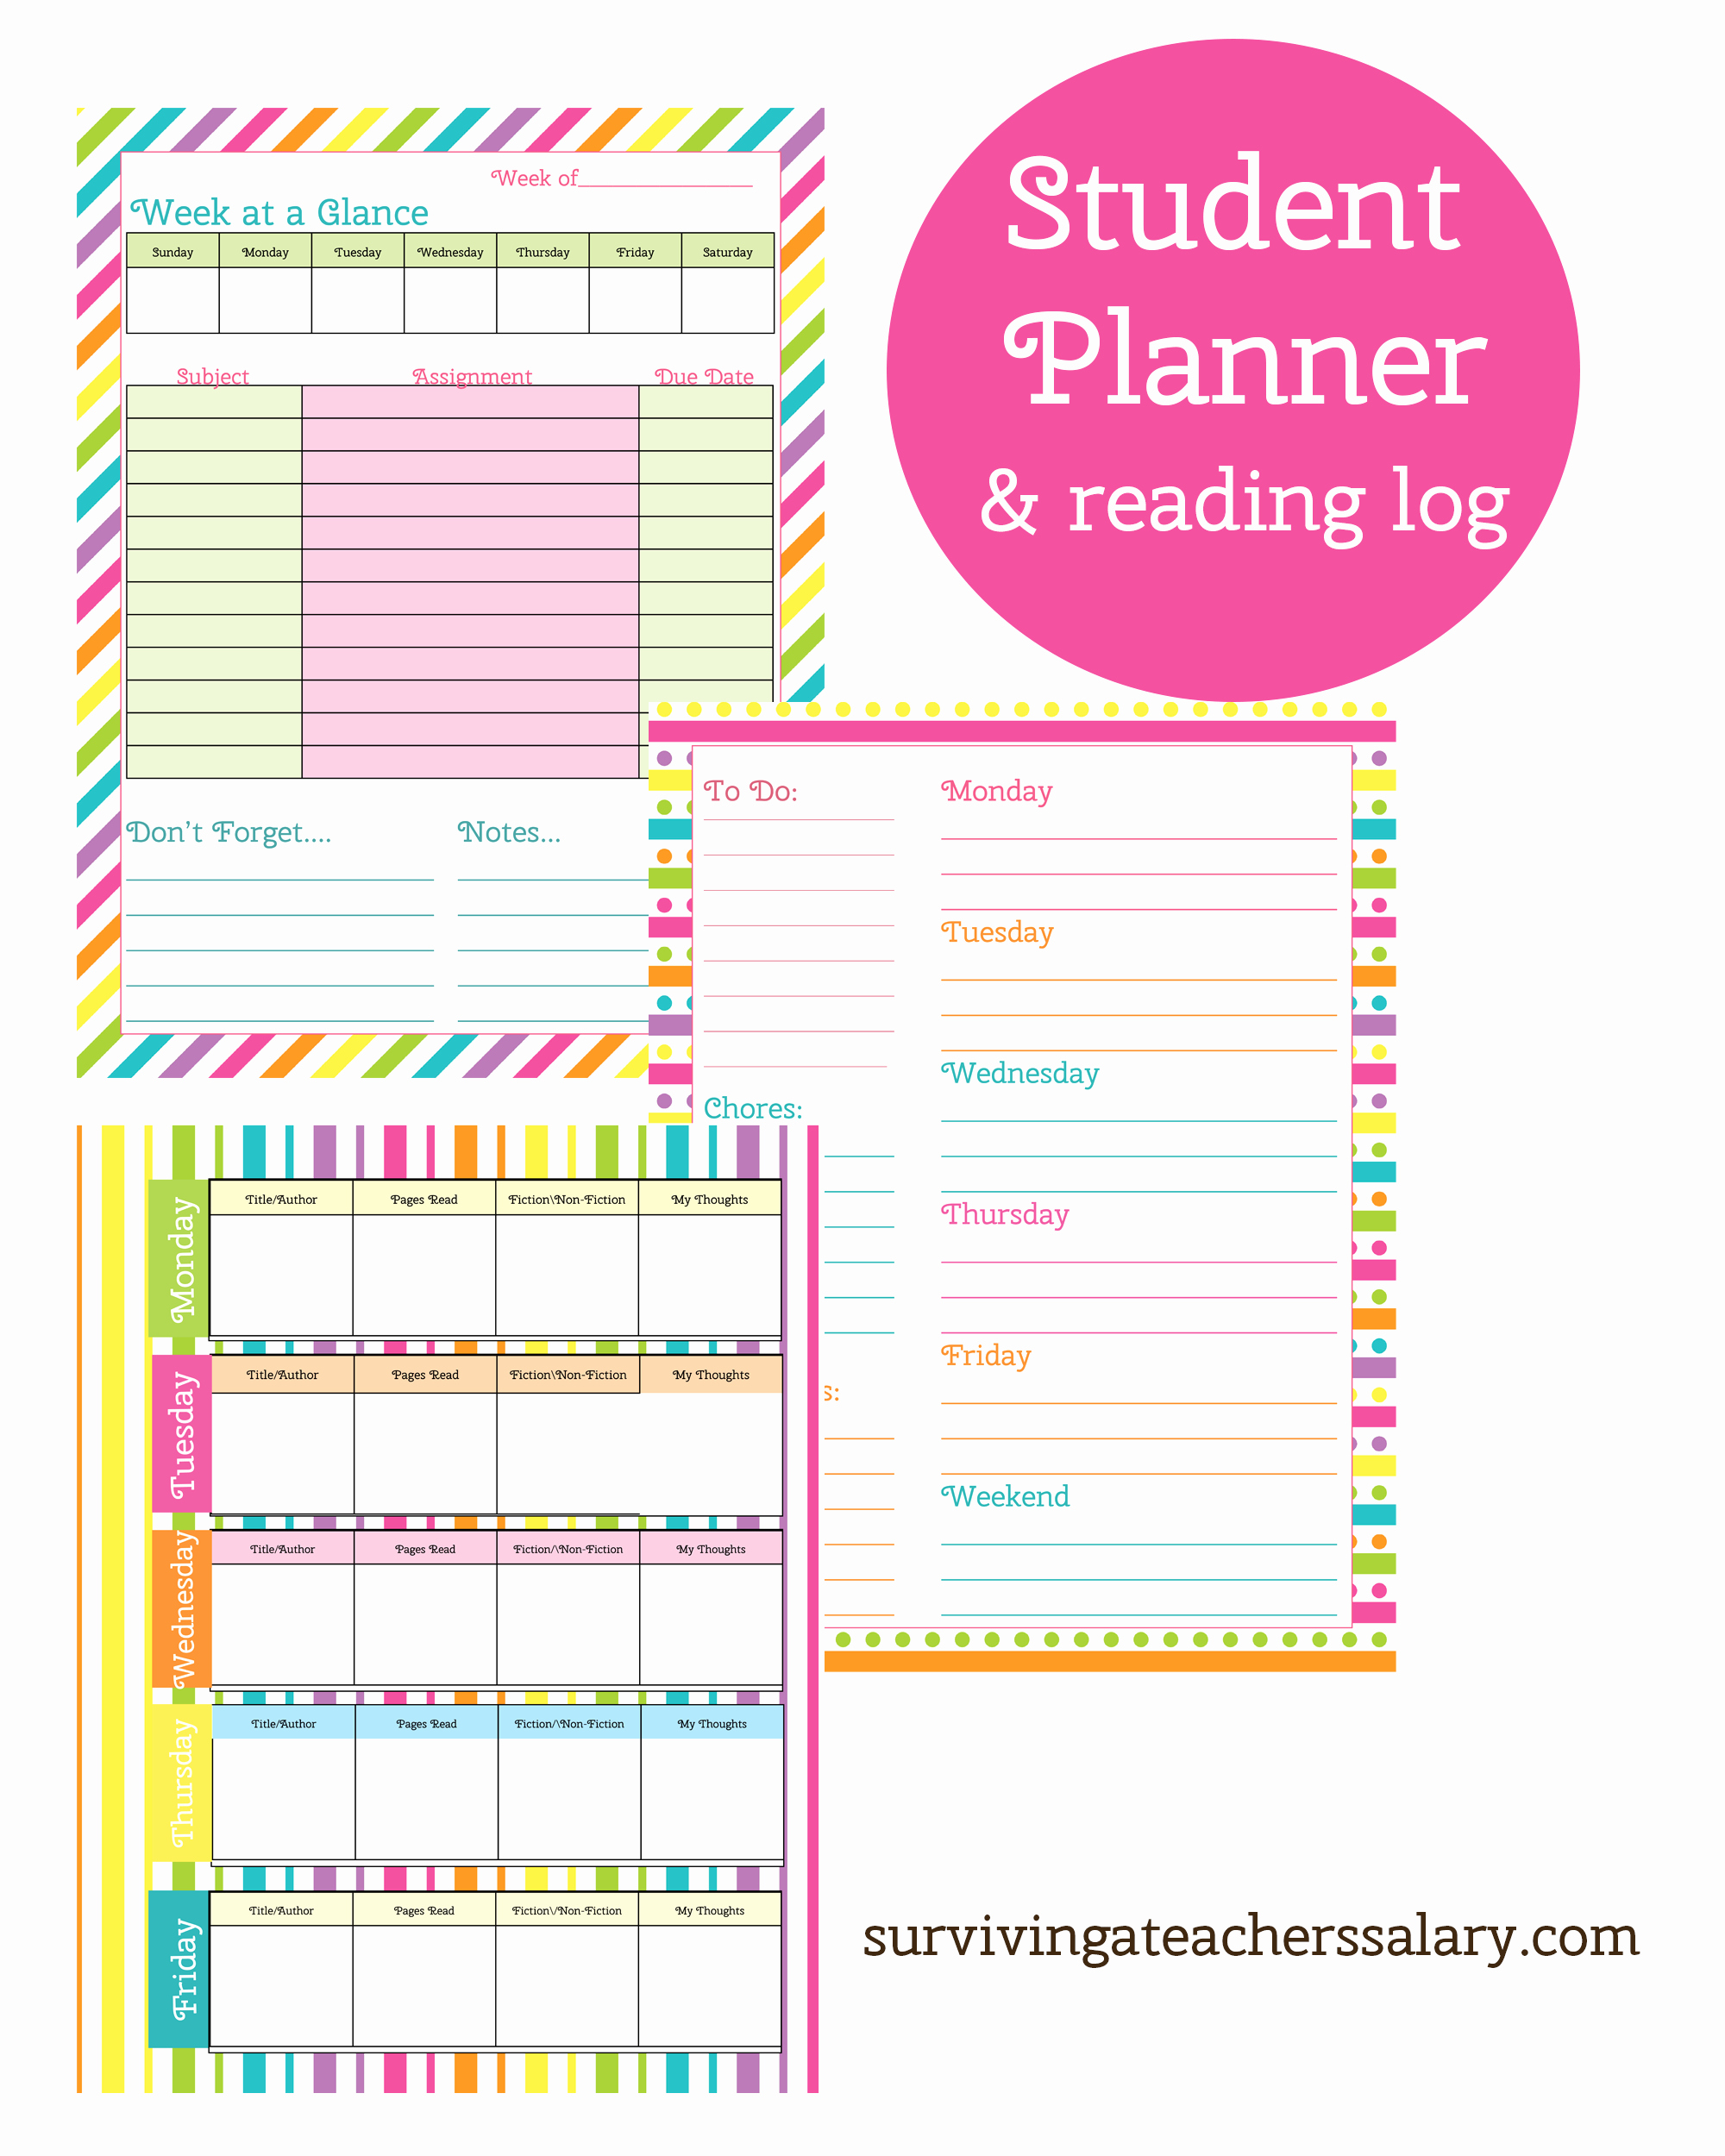 Printable Weekly Planner for Students Awesome Printable Student Planner and Reading Log